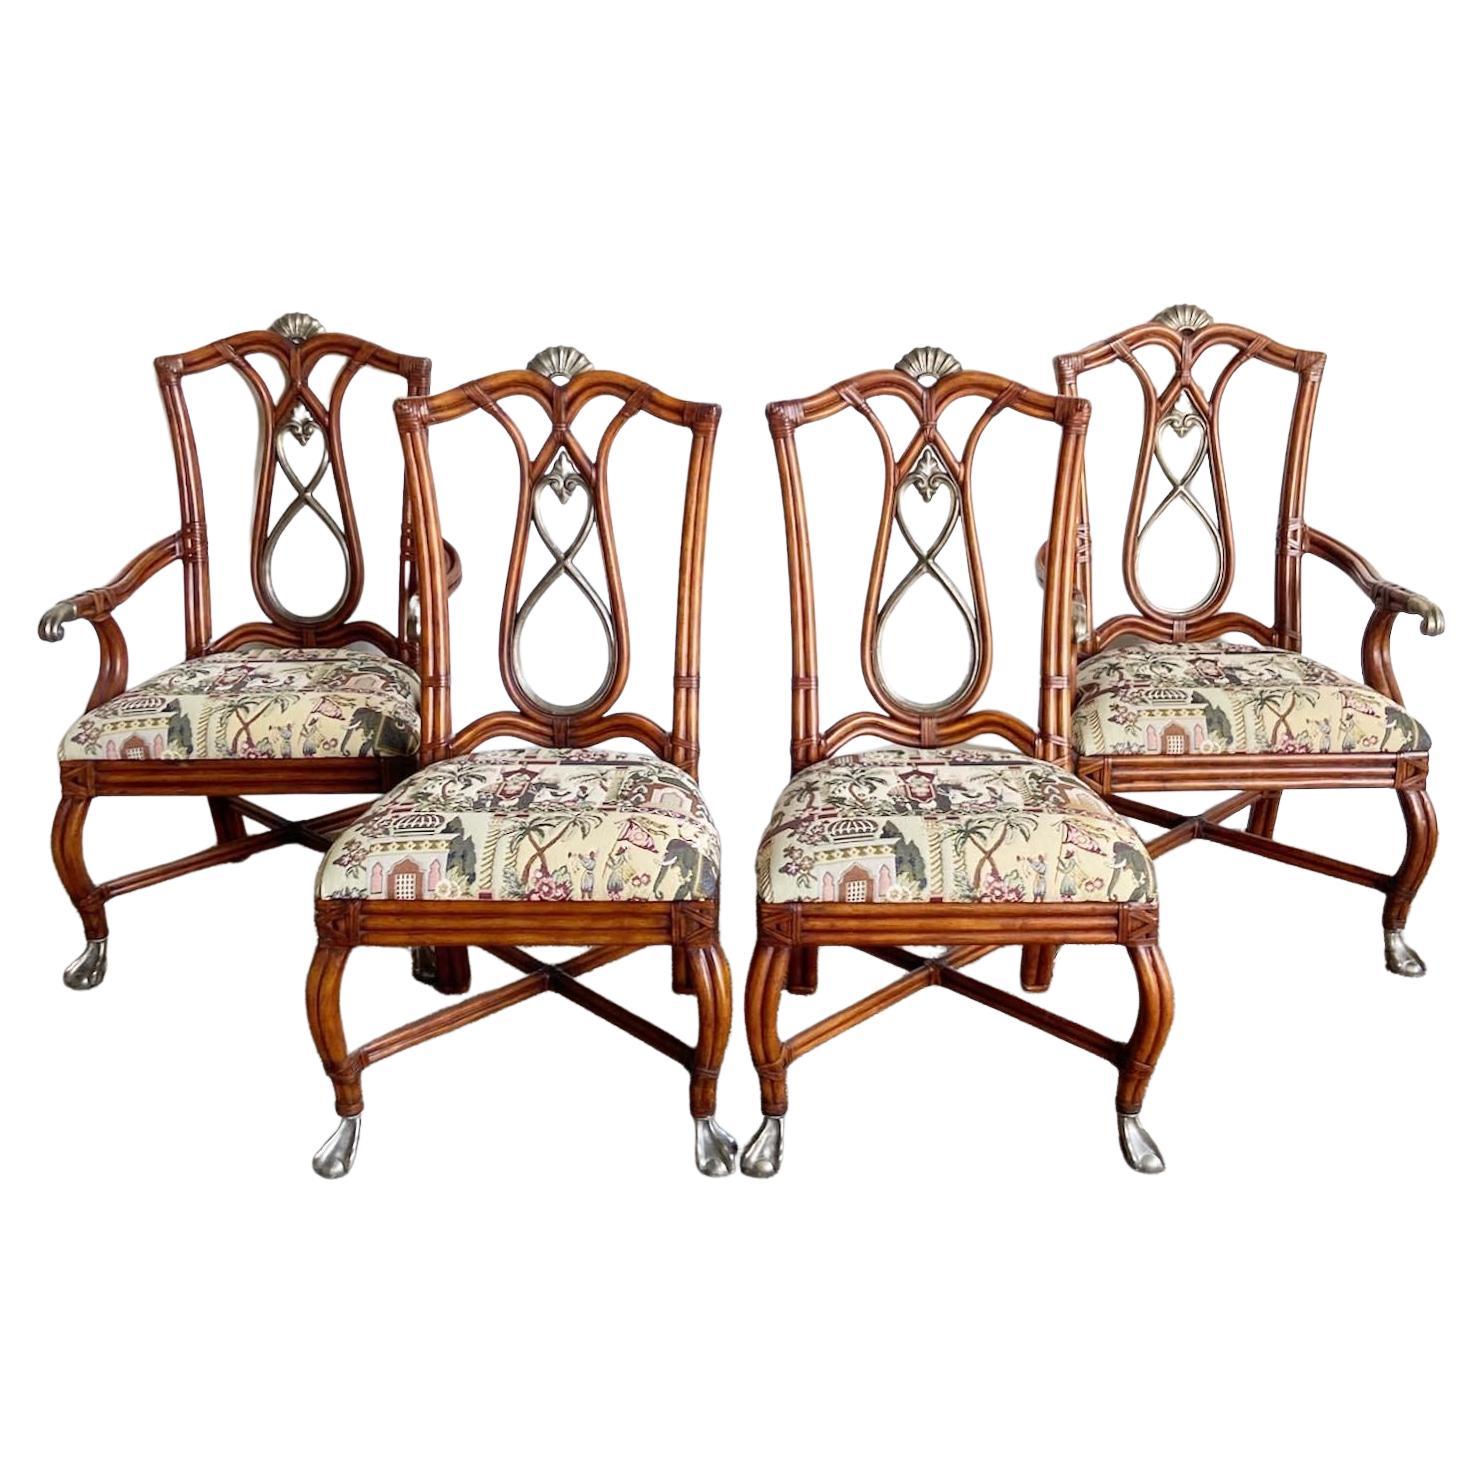 Boho Chic Ornate Bamboo Rattan Ball in Claw Dining Chairs - Set of 4 For Sale